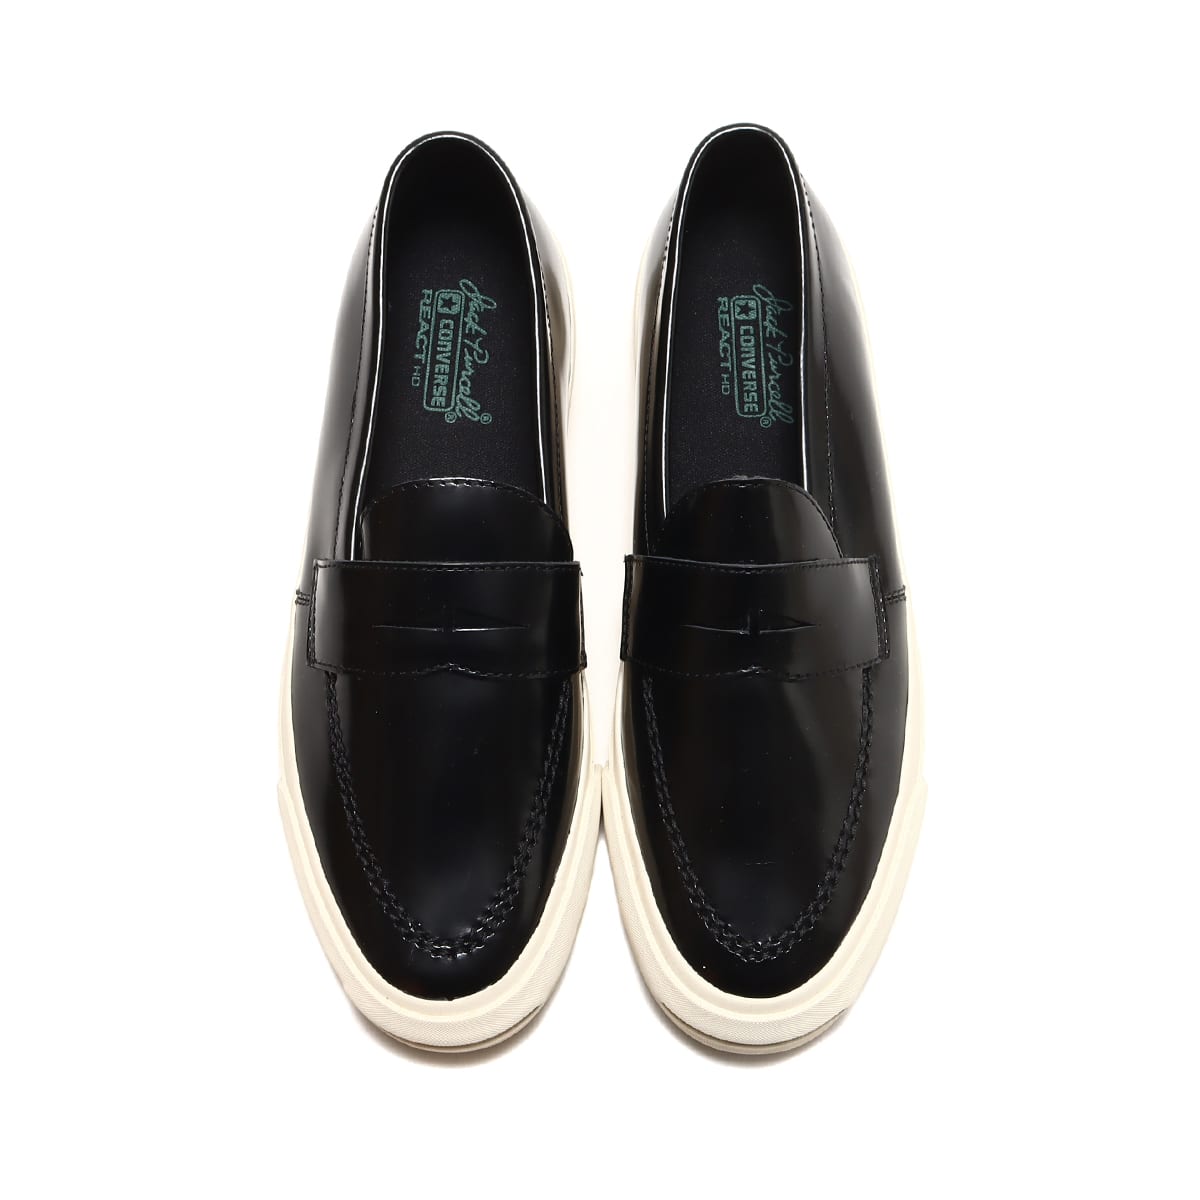 CONVERSE JACK PURCELL LOAFER RH BLACK 23SS-I